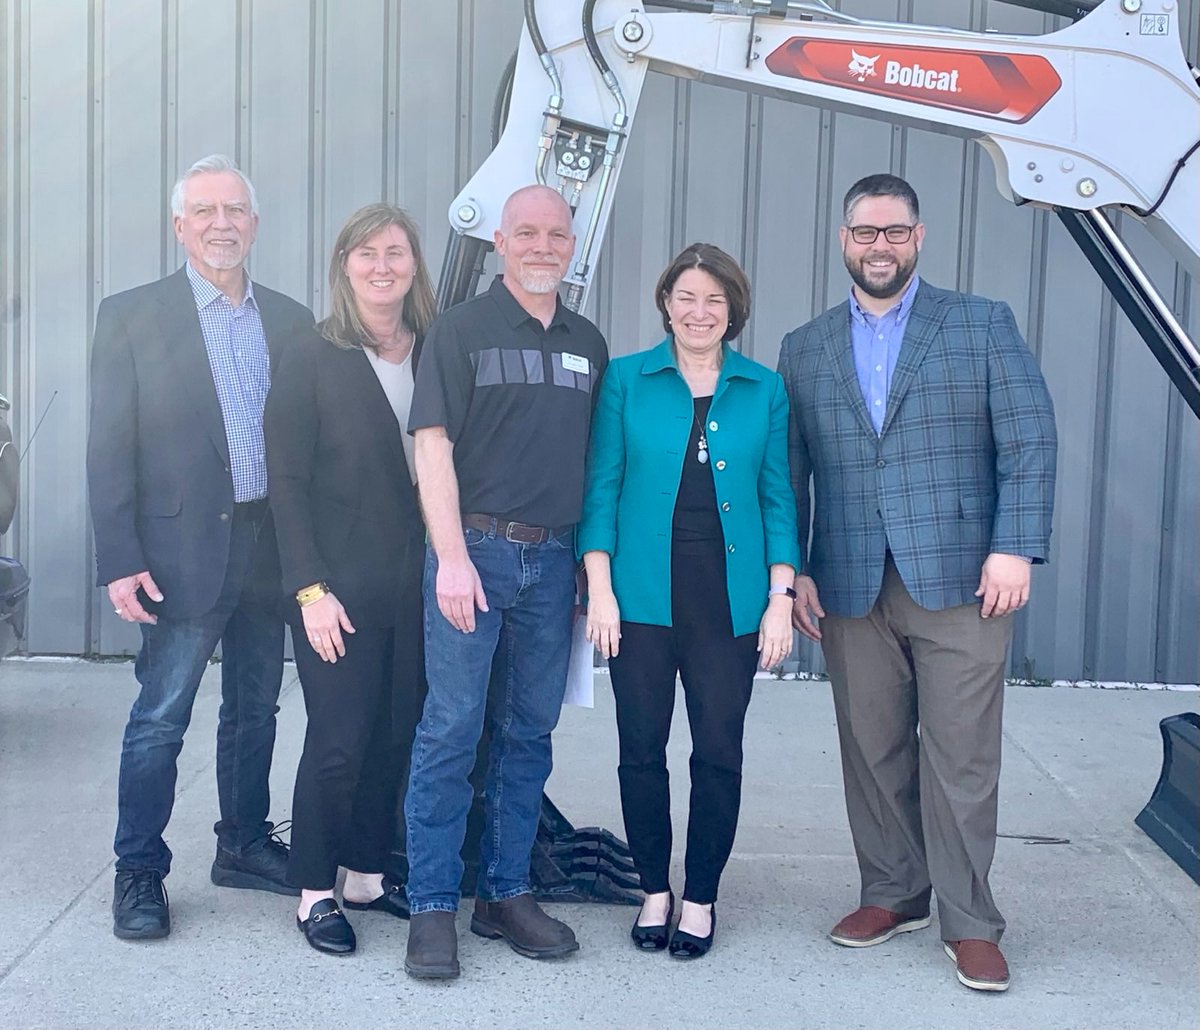 I went to Doosan Bobcat in Litchfield to see their newly expanded facility and hear about their work creating attachments for mowers and grappling equipment. Manufacturing helps drive our state’s economy, and I’m working to keep it that way.